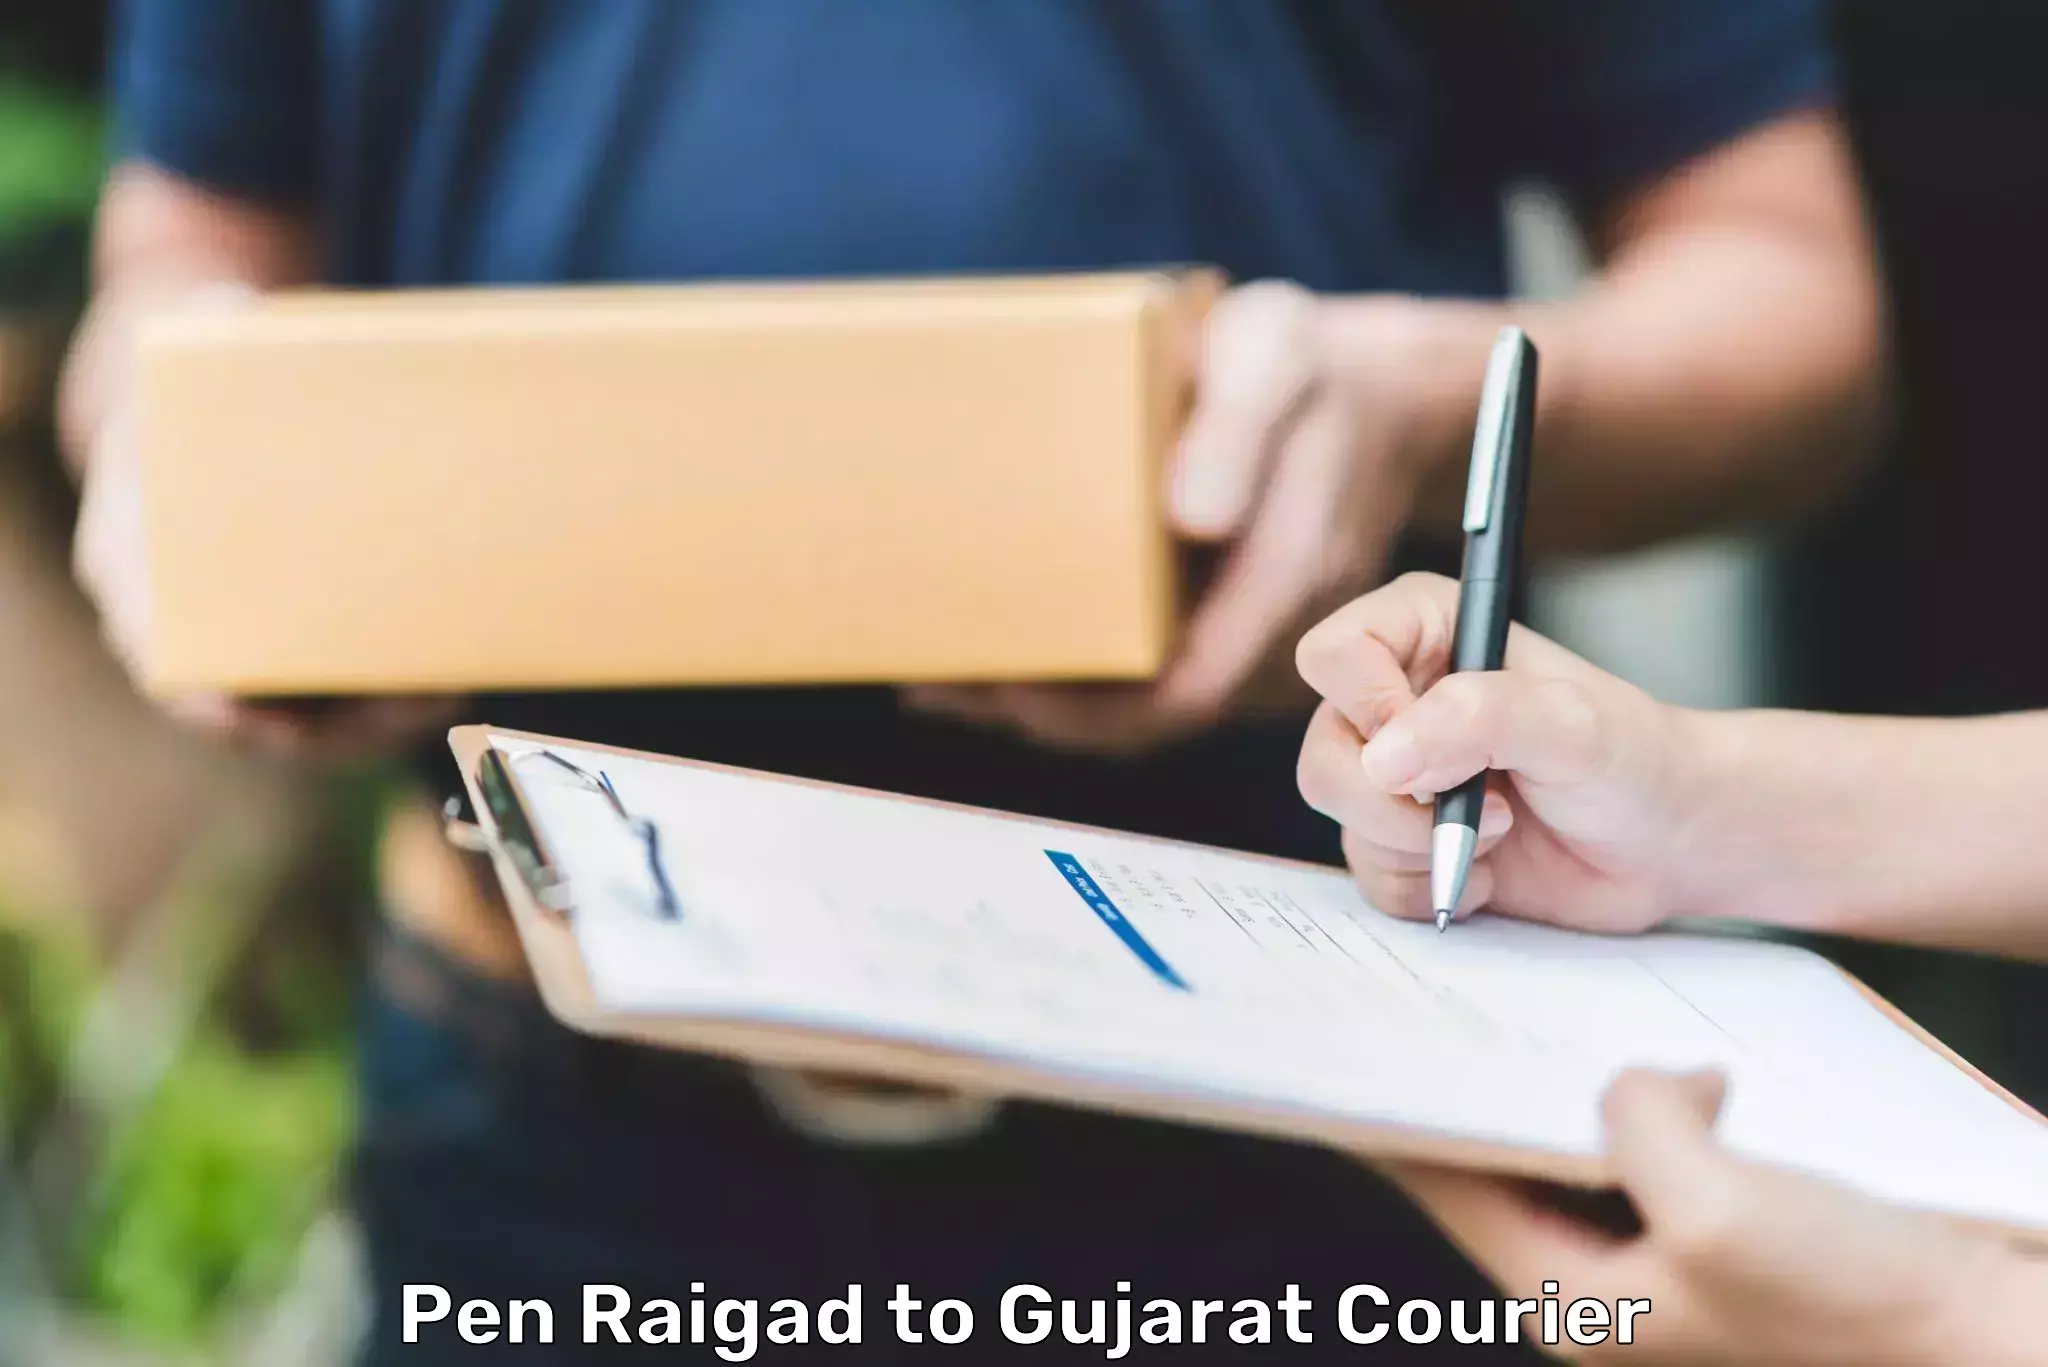 Nationwide delivery network Pen Raigad to Rajkot